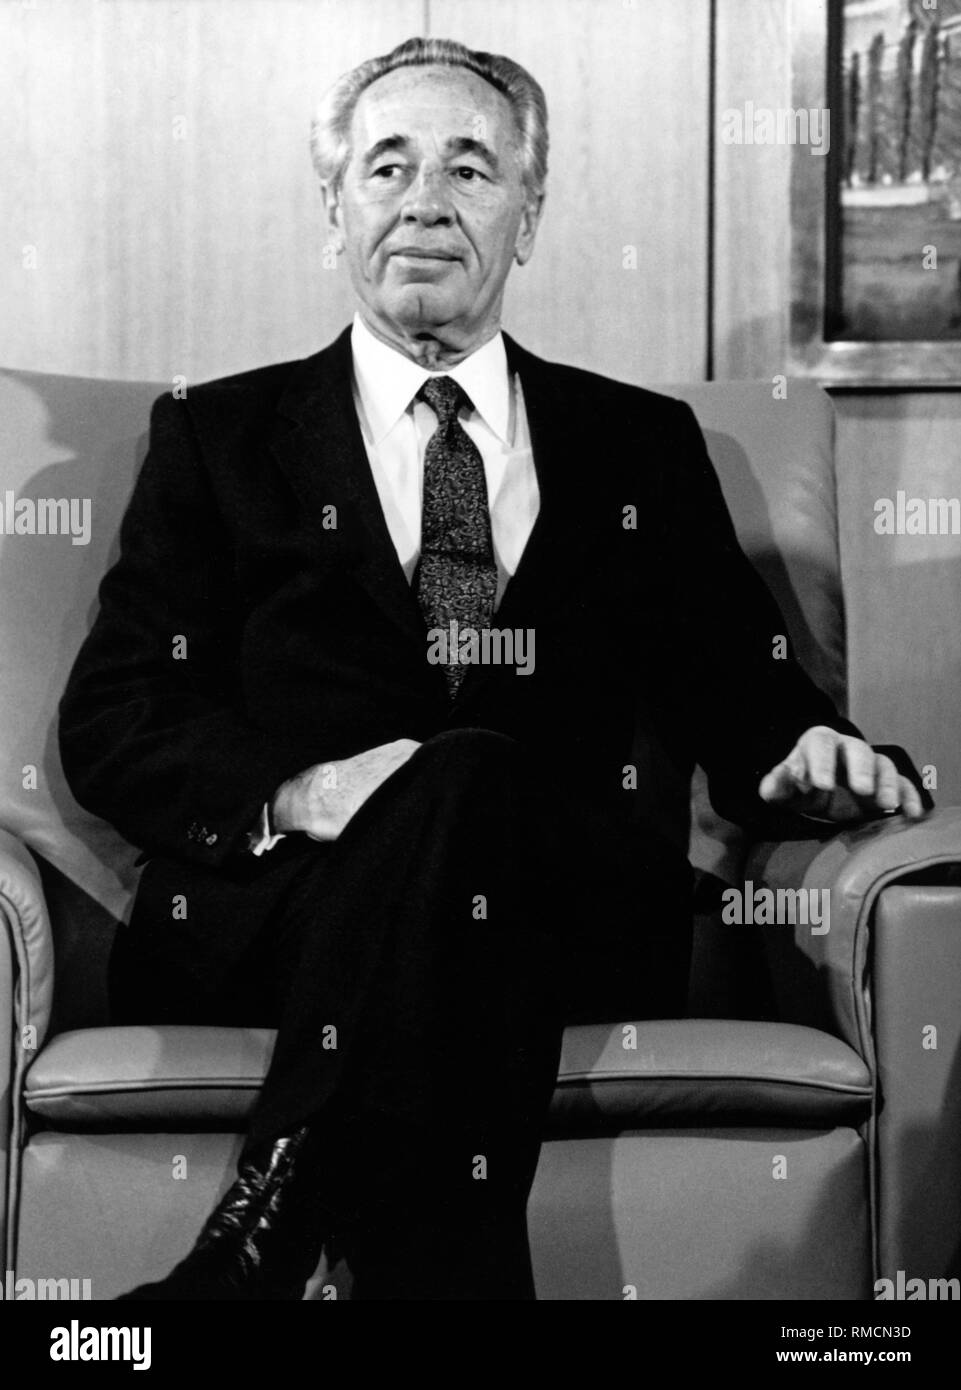 Shimon Peres as Prime Minister of Israel. Peres held this position from 1984 to 1986 and again from 1995 to 1996. Stock Photo